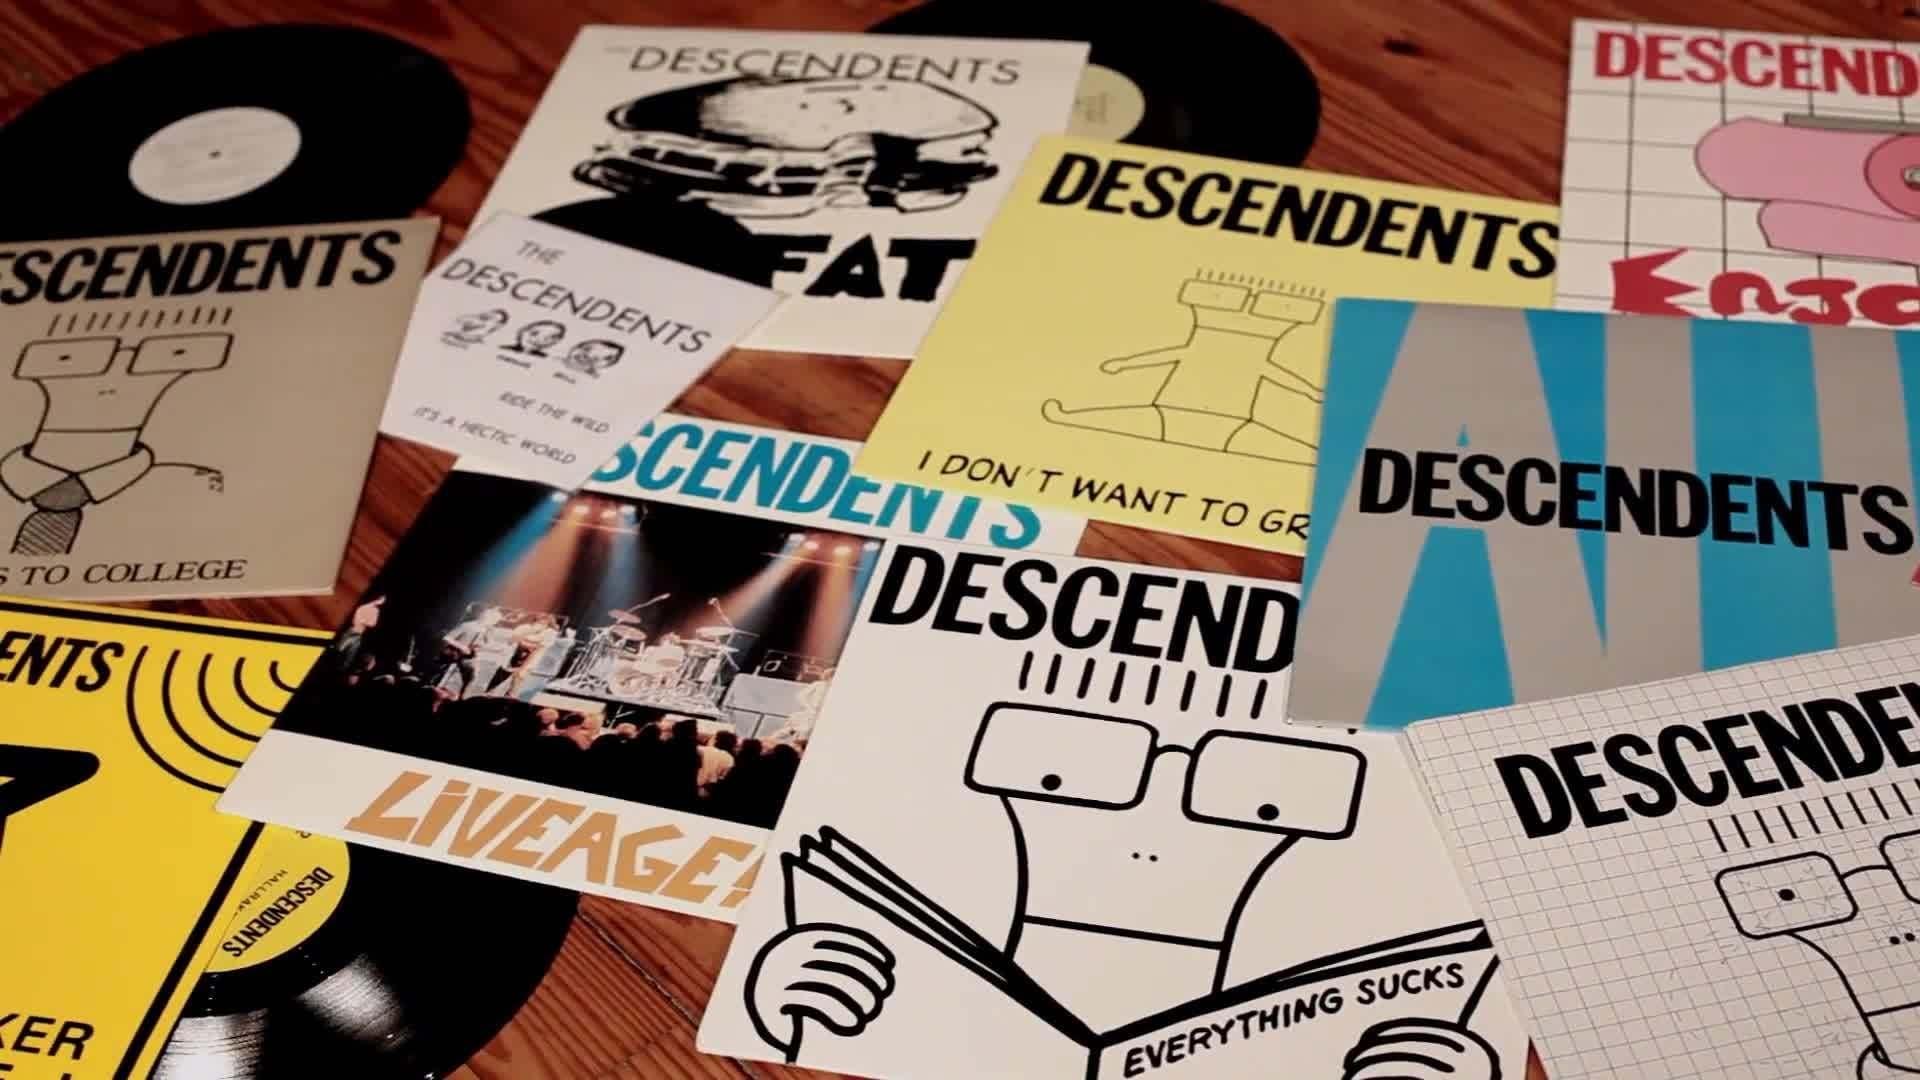 Filmage: The Story of Descendents/All backdrop